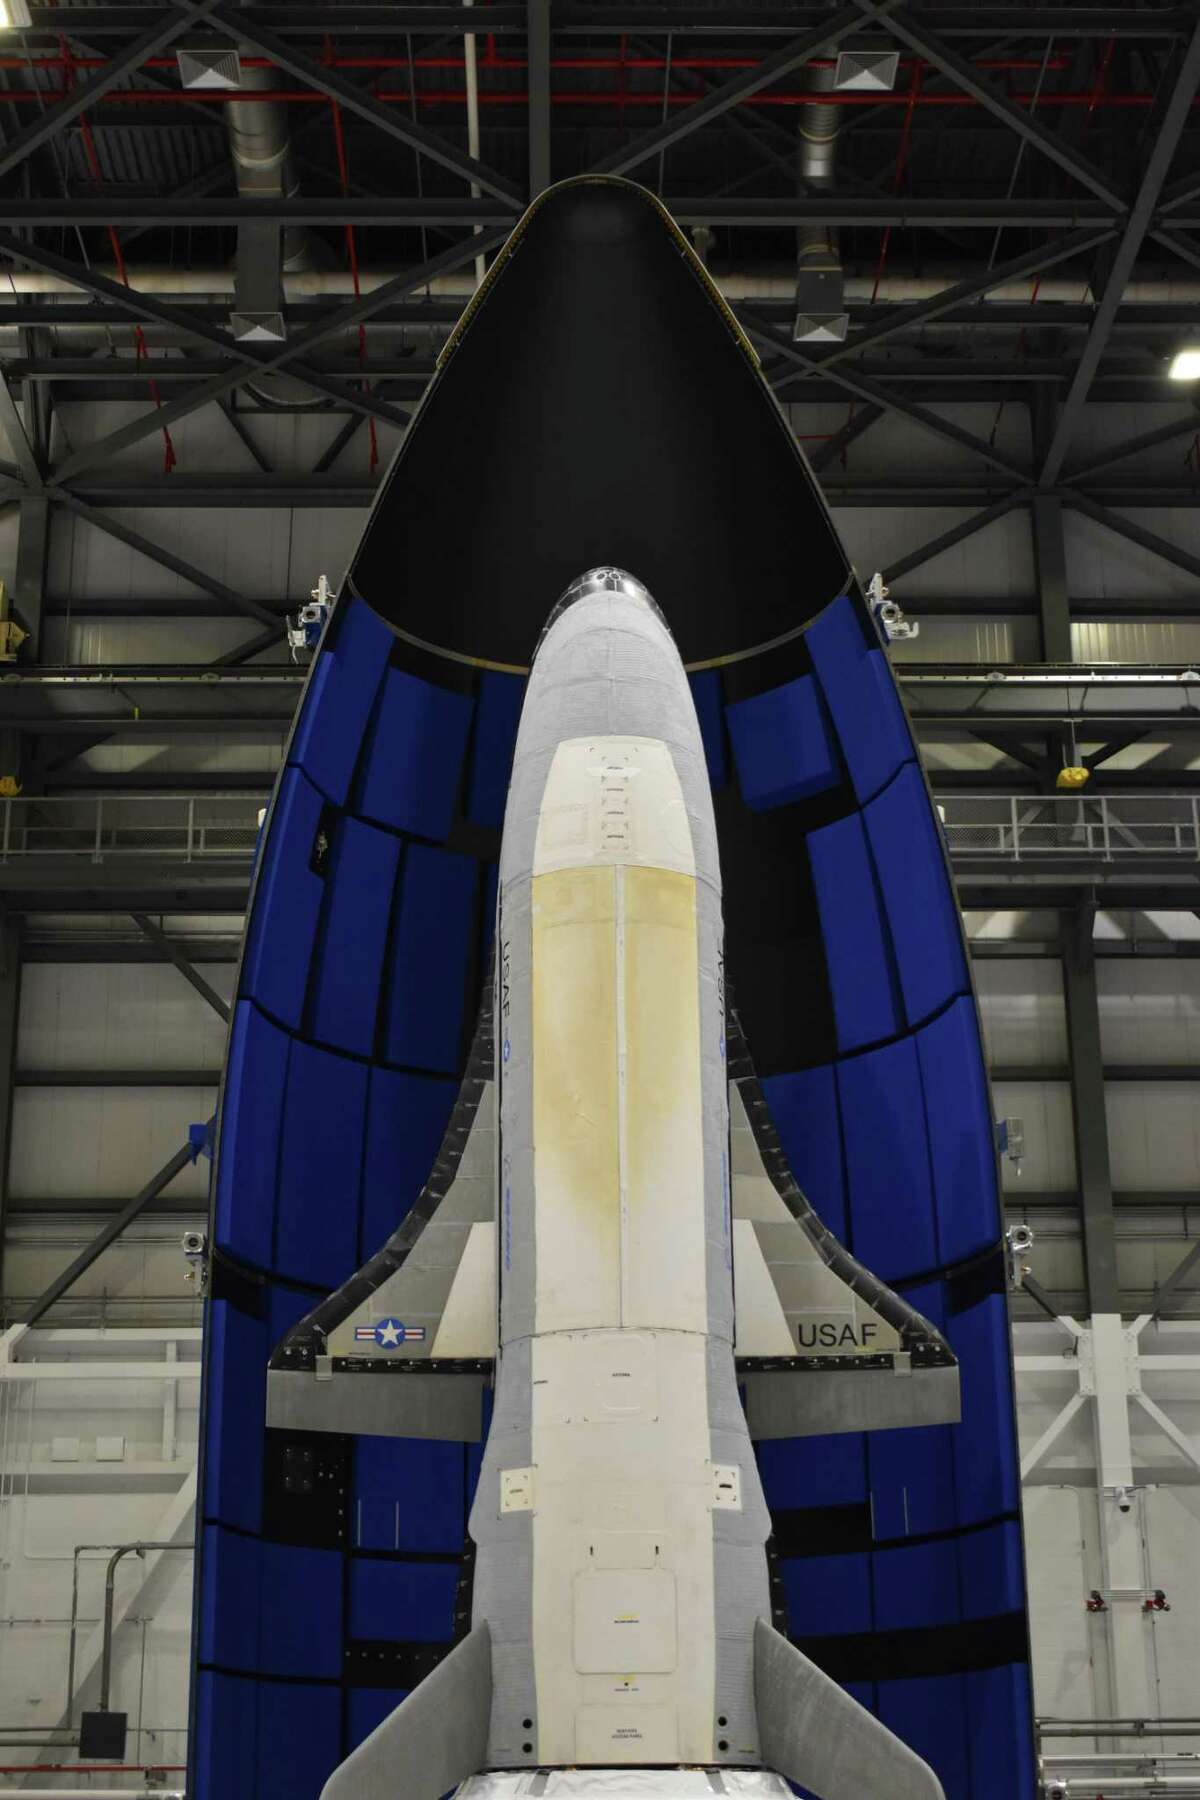 The encapsulated X-37B Orbital Test Vehicle for United States Space Force-7 mission. The vehicle is covered by a fairing during launch.